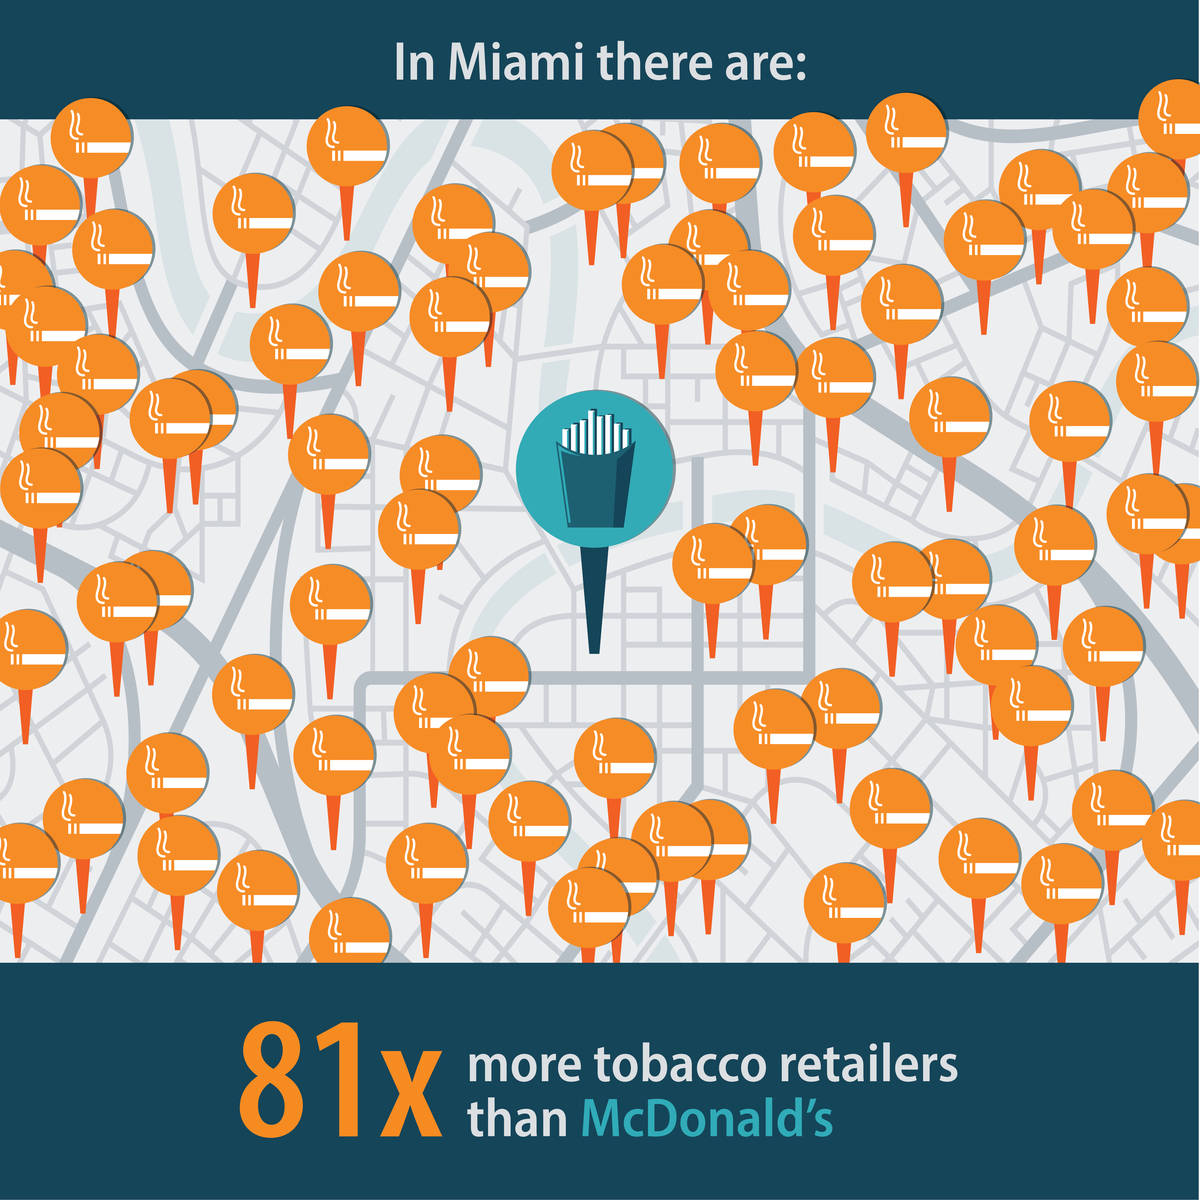 In Miami there are: 81 times more tobacco retailers than McDonald's